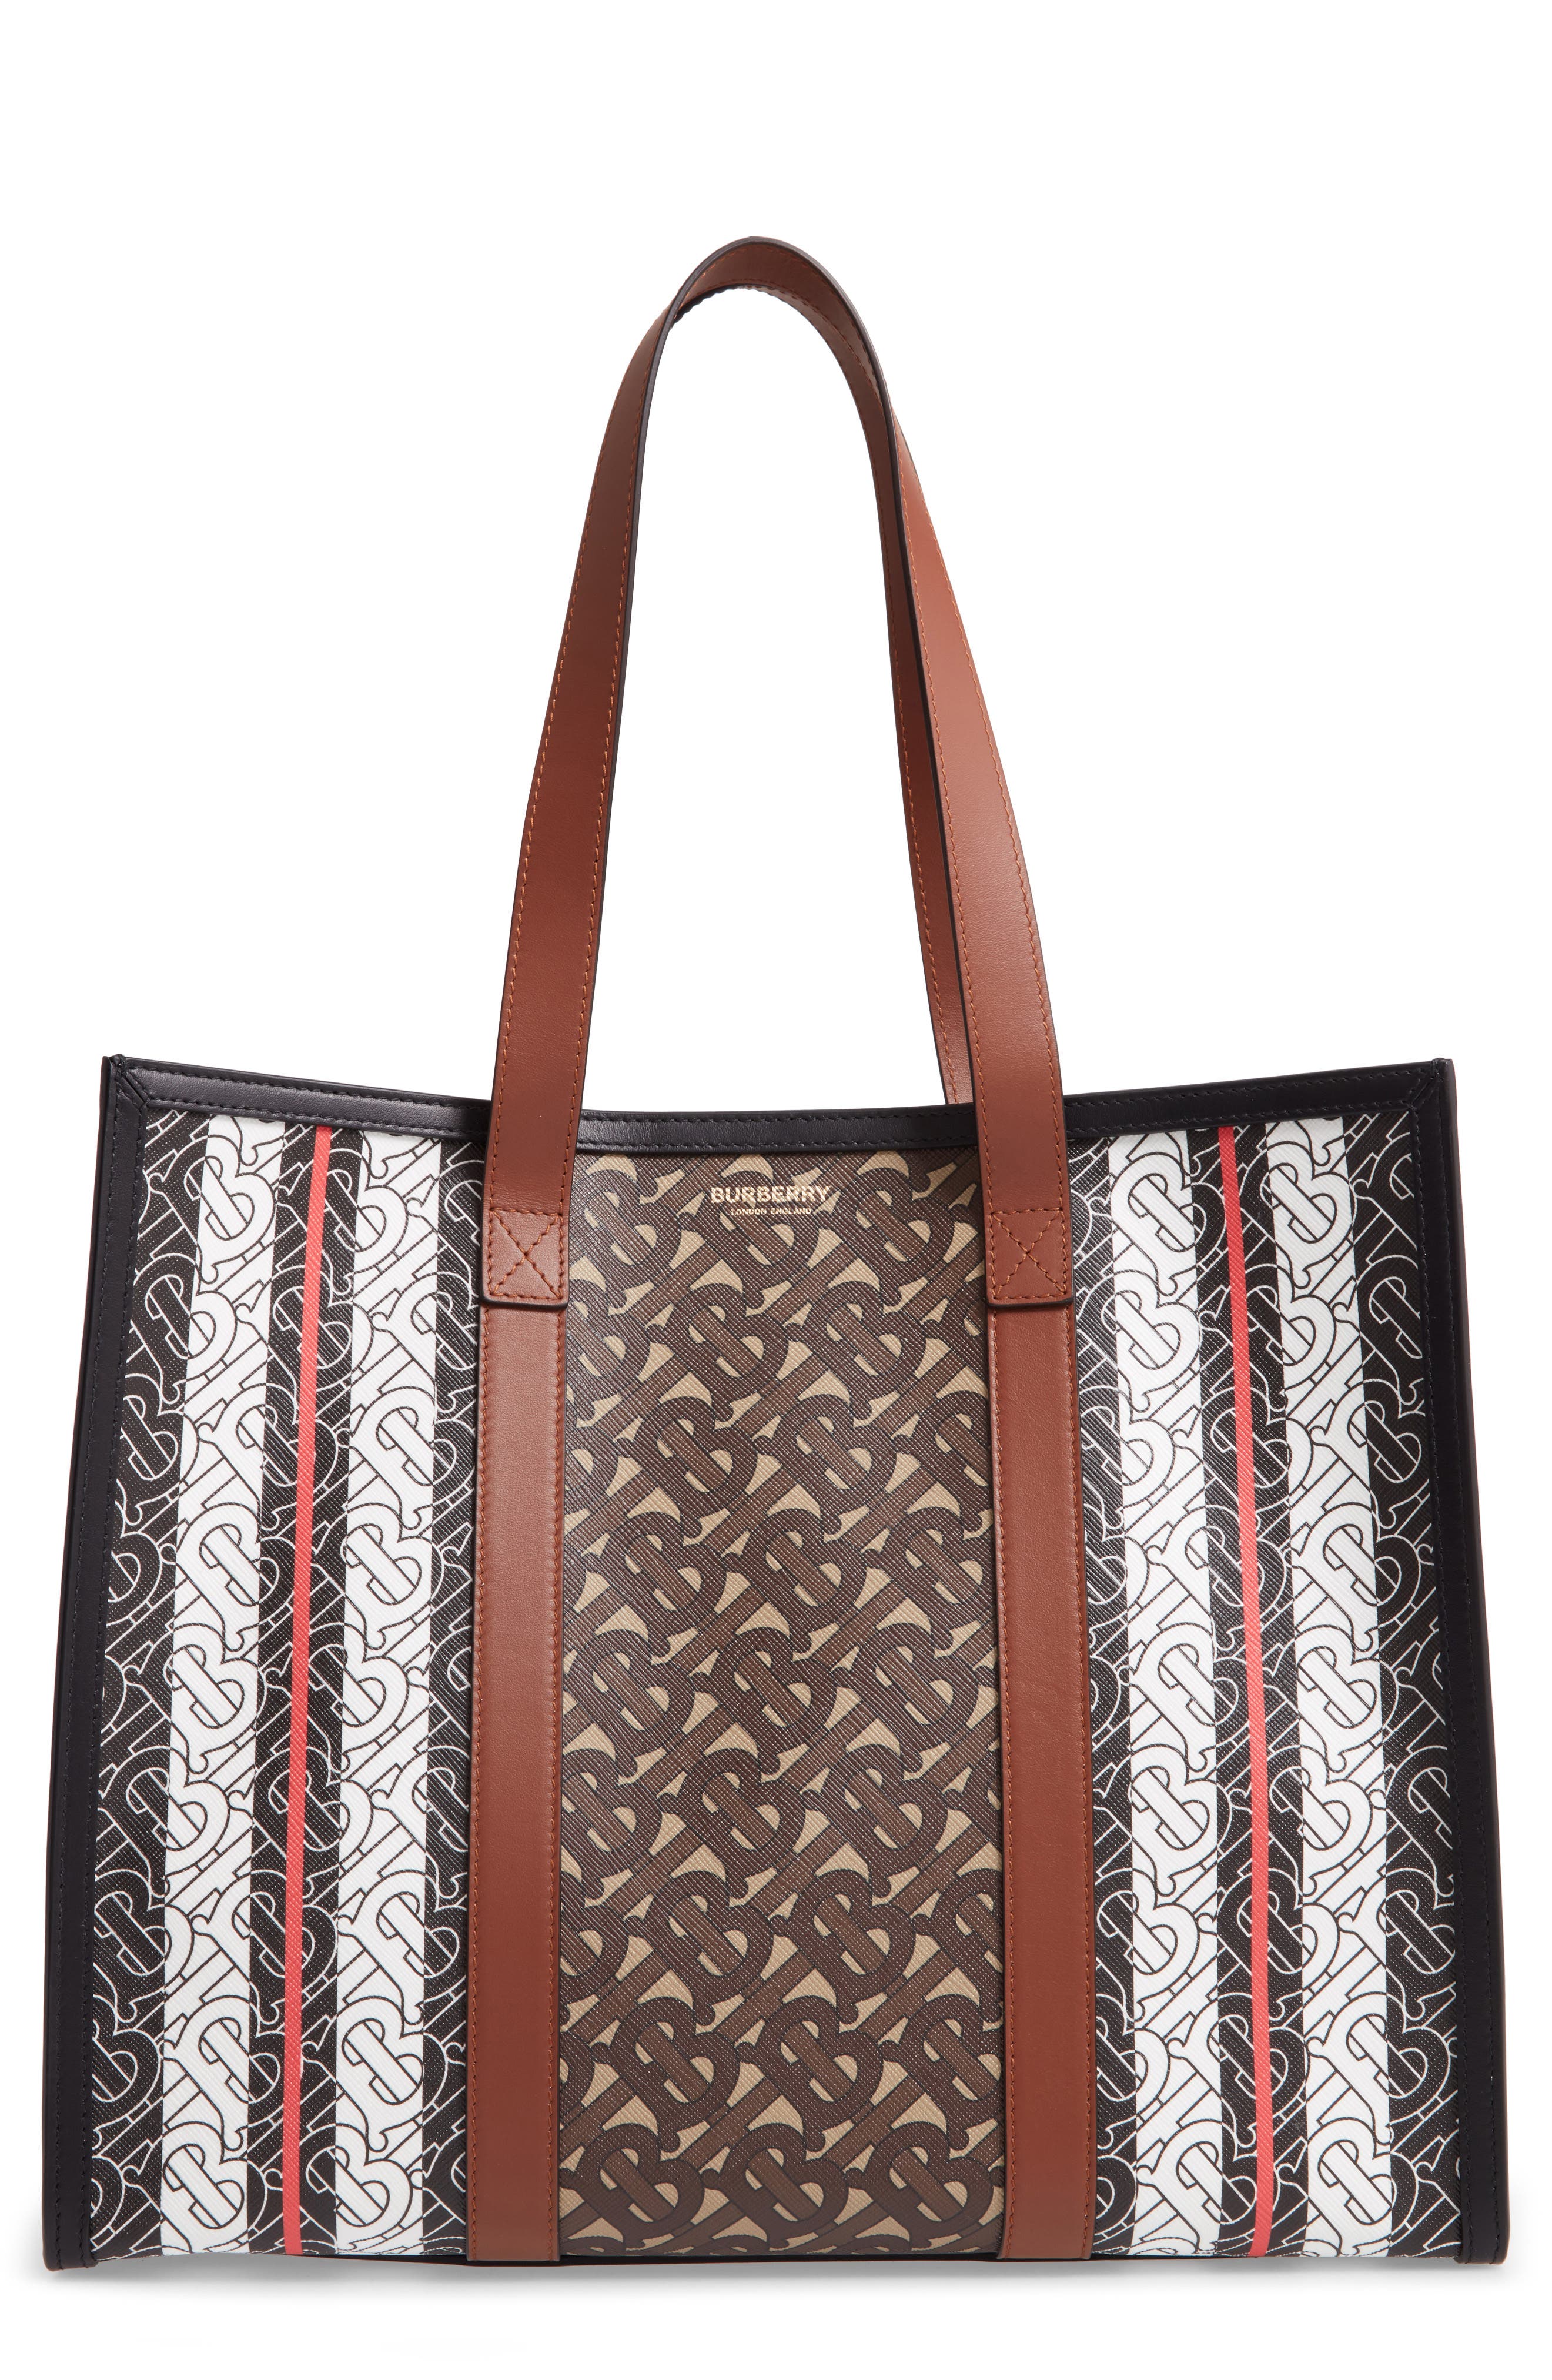 Burberry Small Book E-Canvas Tote in Bridle Brown at Nordstrom